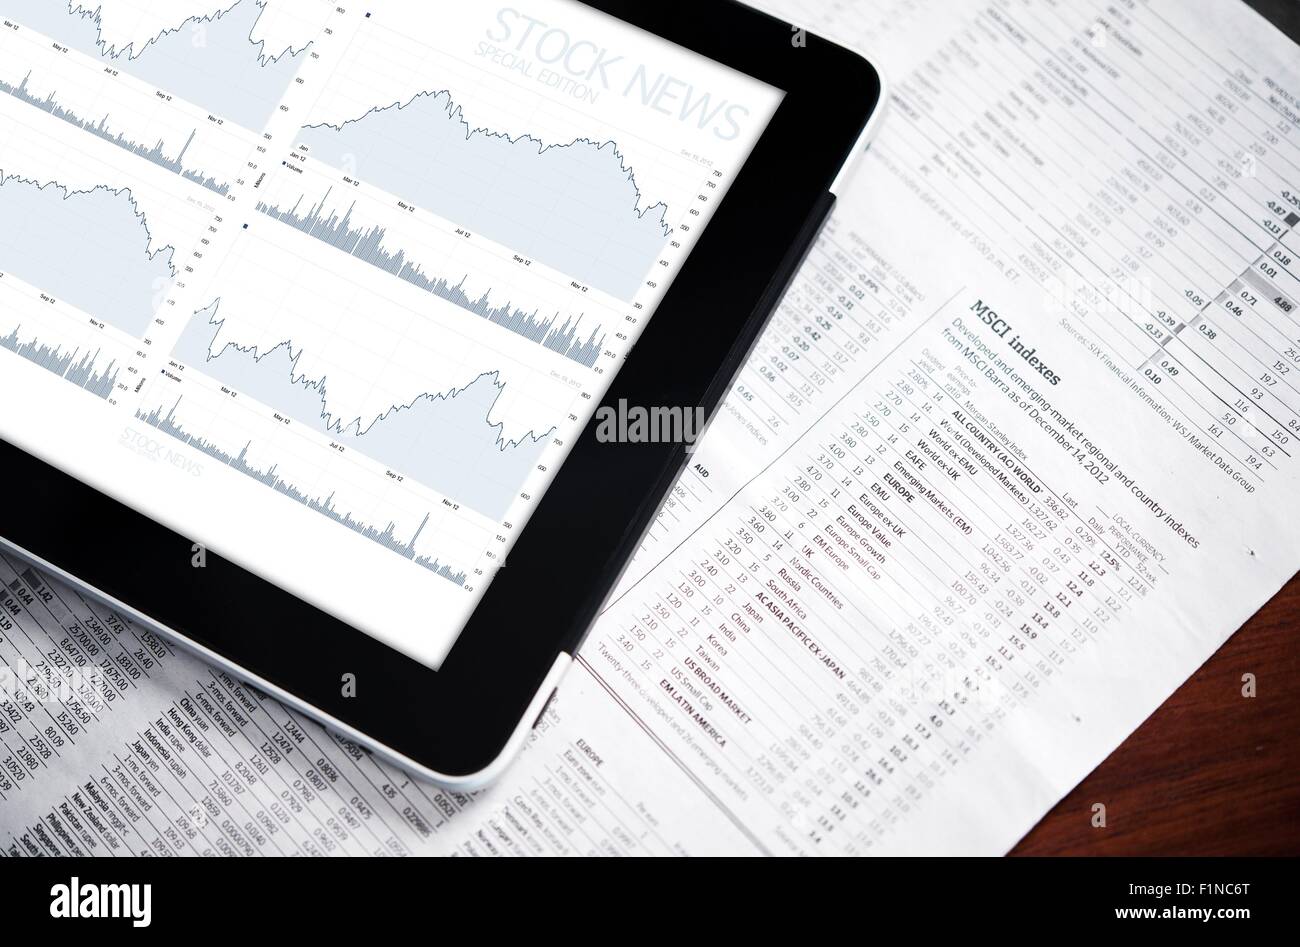 Stock Market Research On Tablet Computer Stocks Newspaper In The